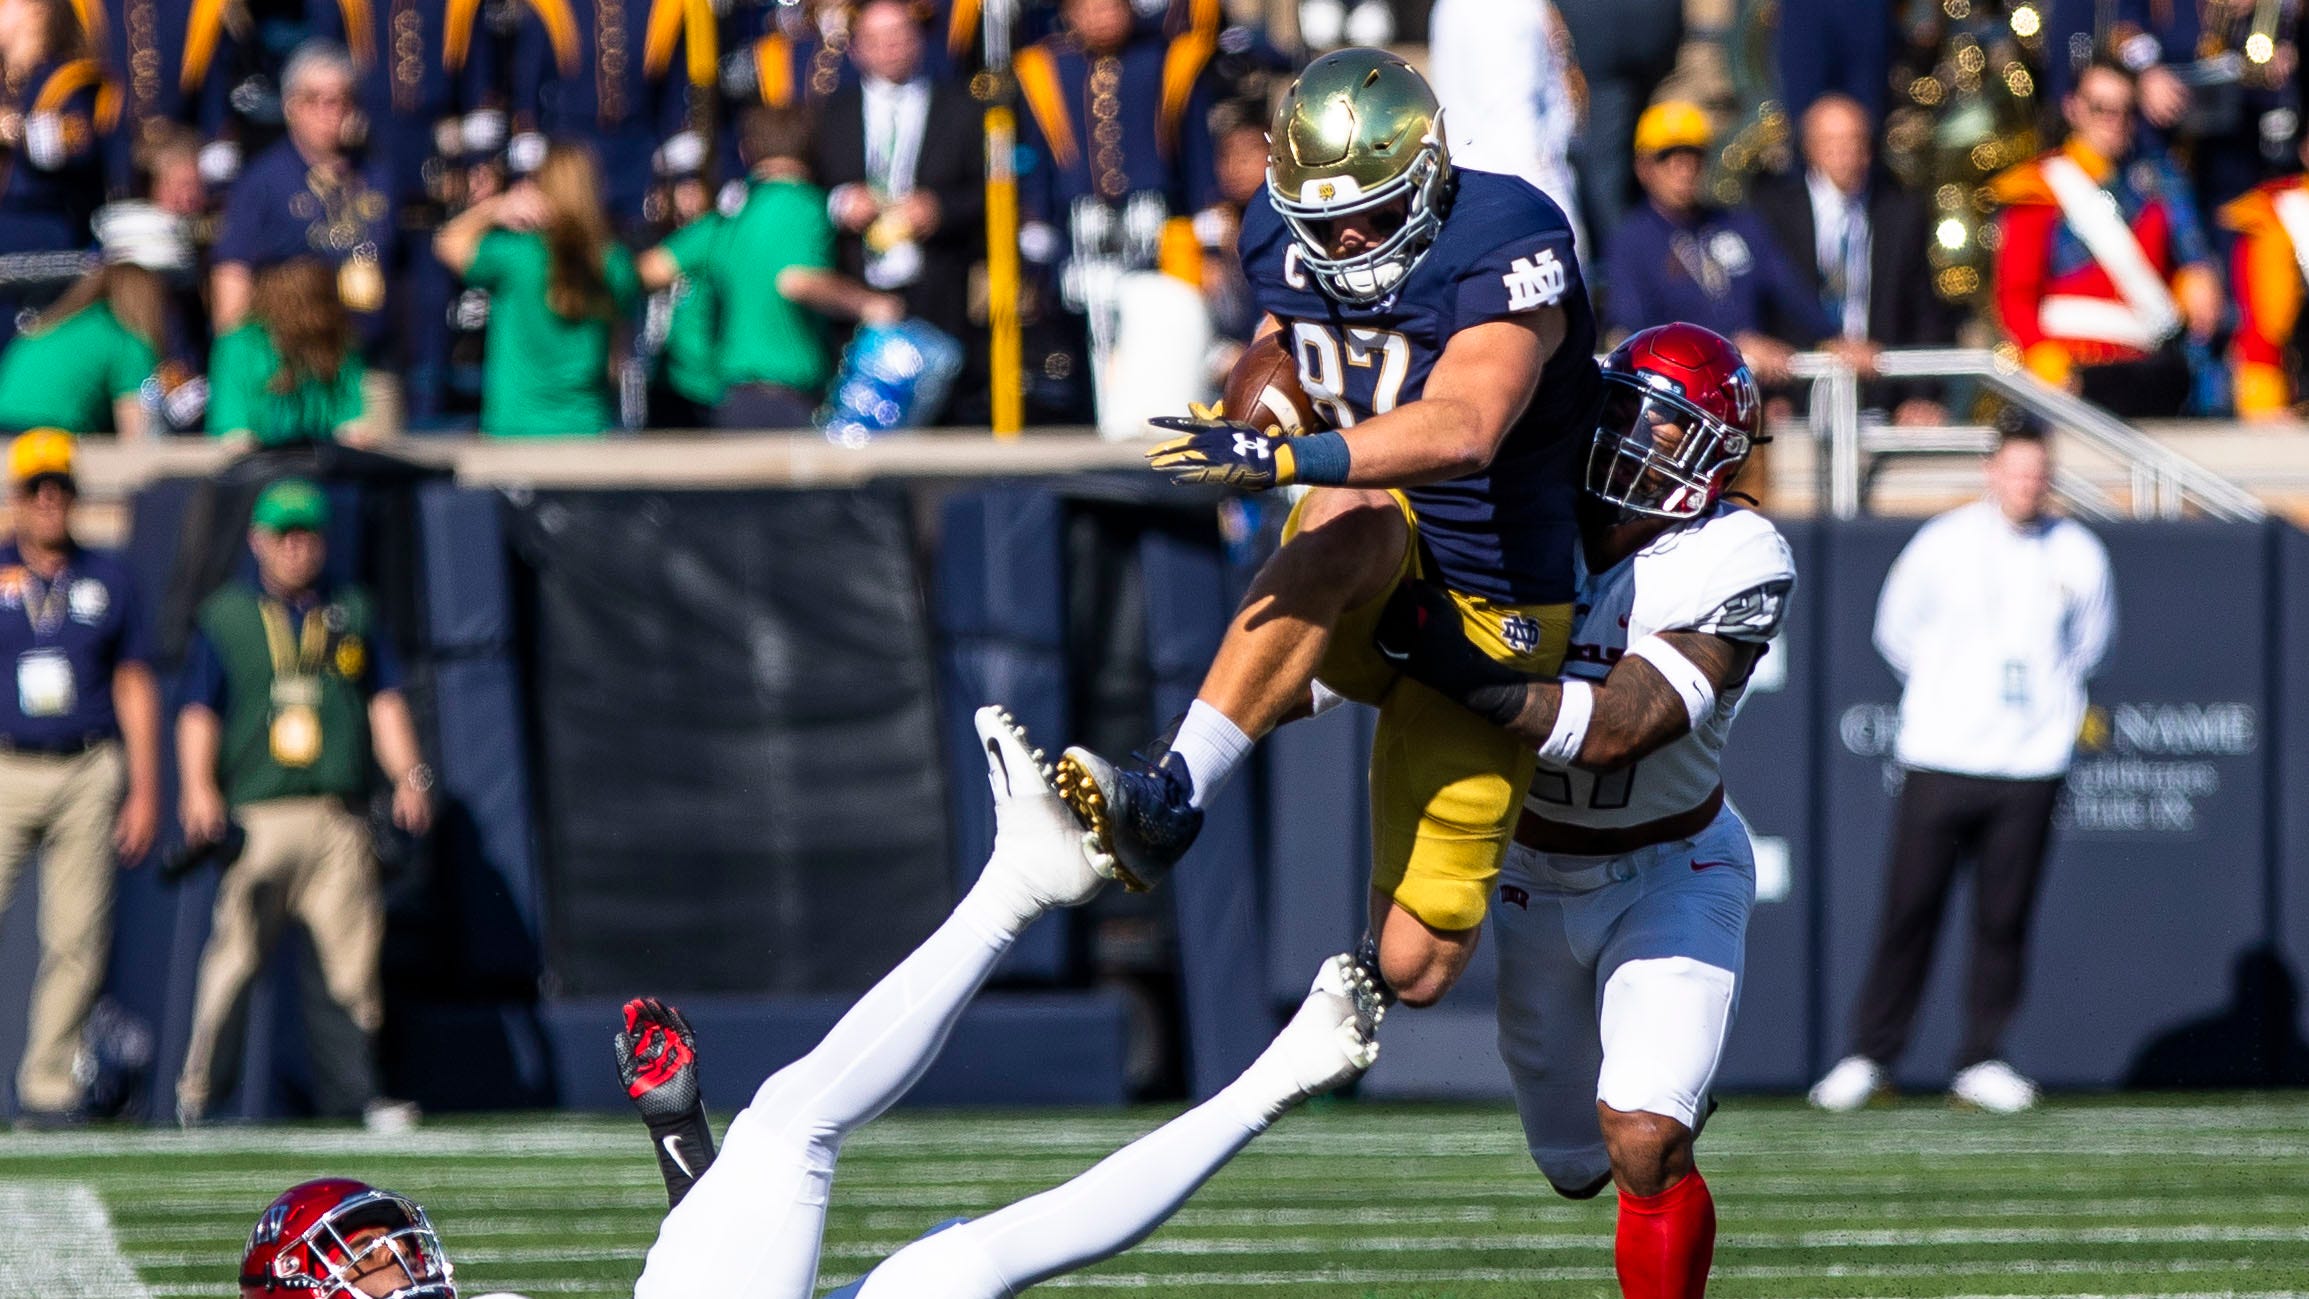 Notre Dame vs UNLV Live college football stats, highlights and scores